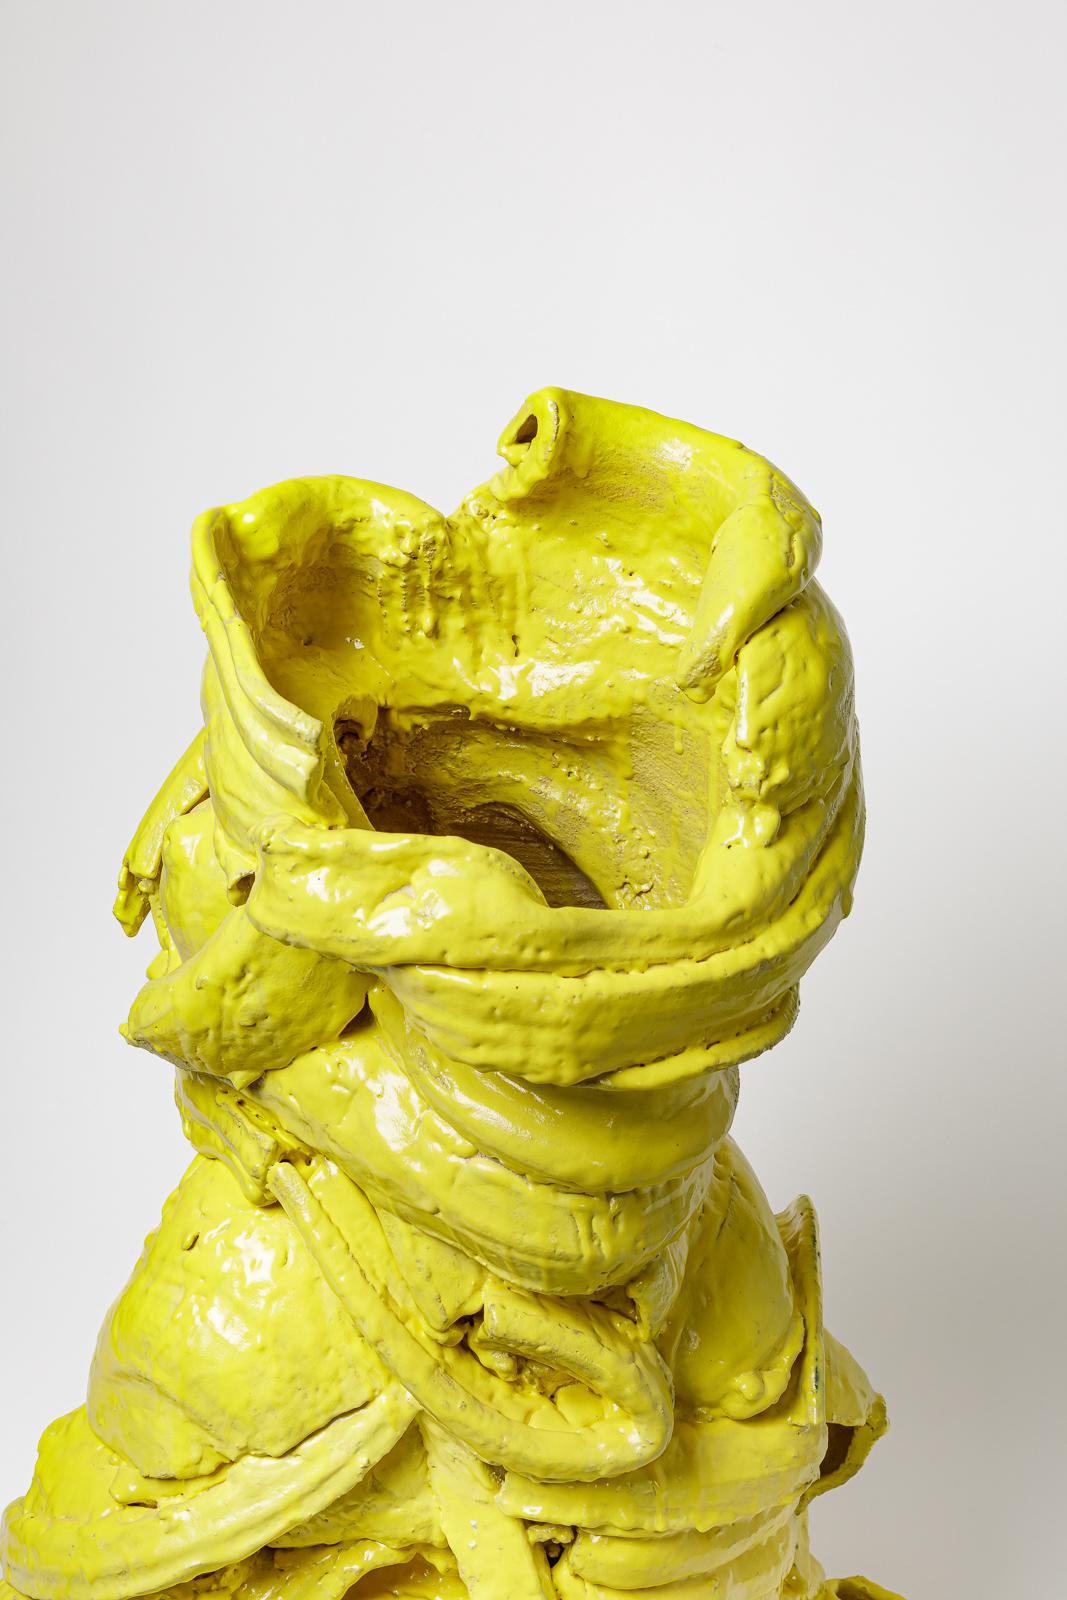 Contemporary Large floor vase in yellow glazed ceramic by Patrick Crulis, 2023.